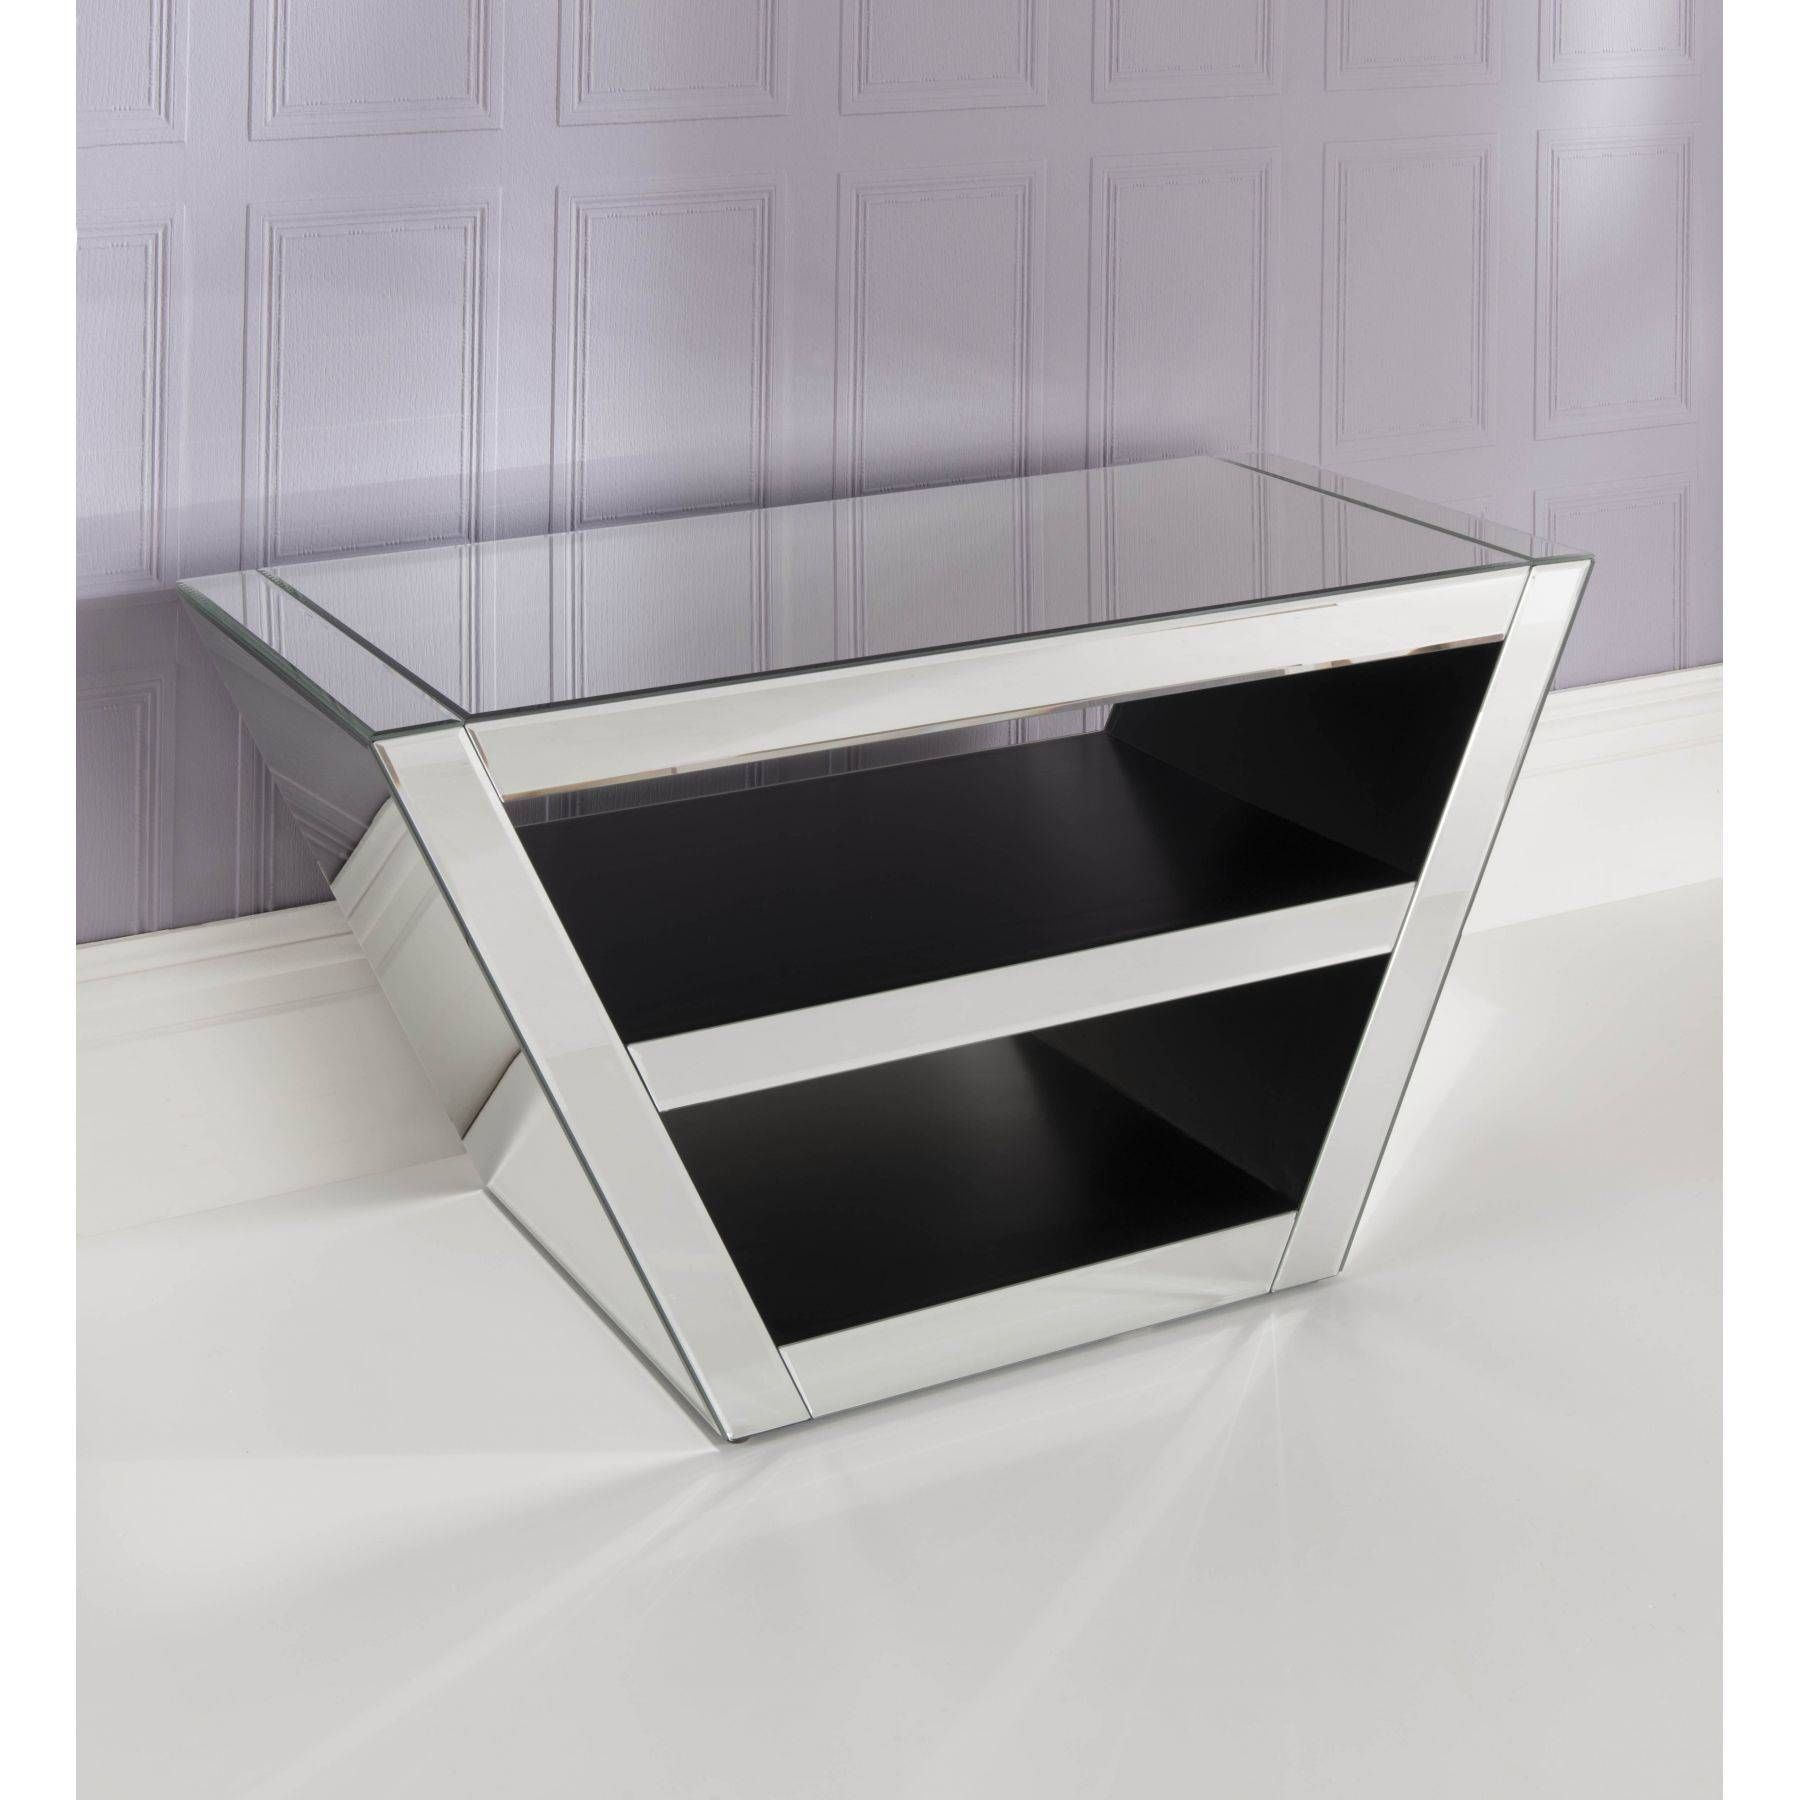 Mirrored Tv Cabinet | Venetian Glass Tv Stand | Homesdirect365 Within Mirror Tv Cabinets (View 1 of 15)